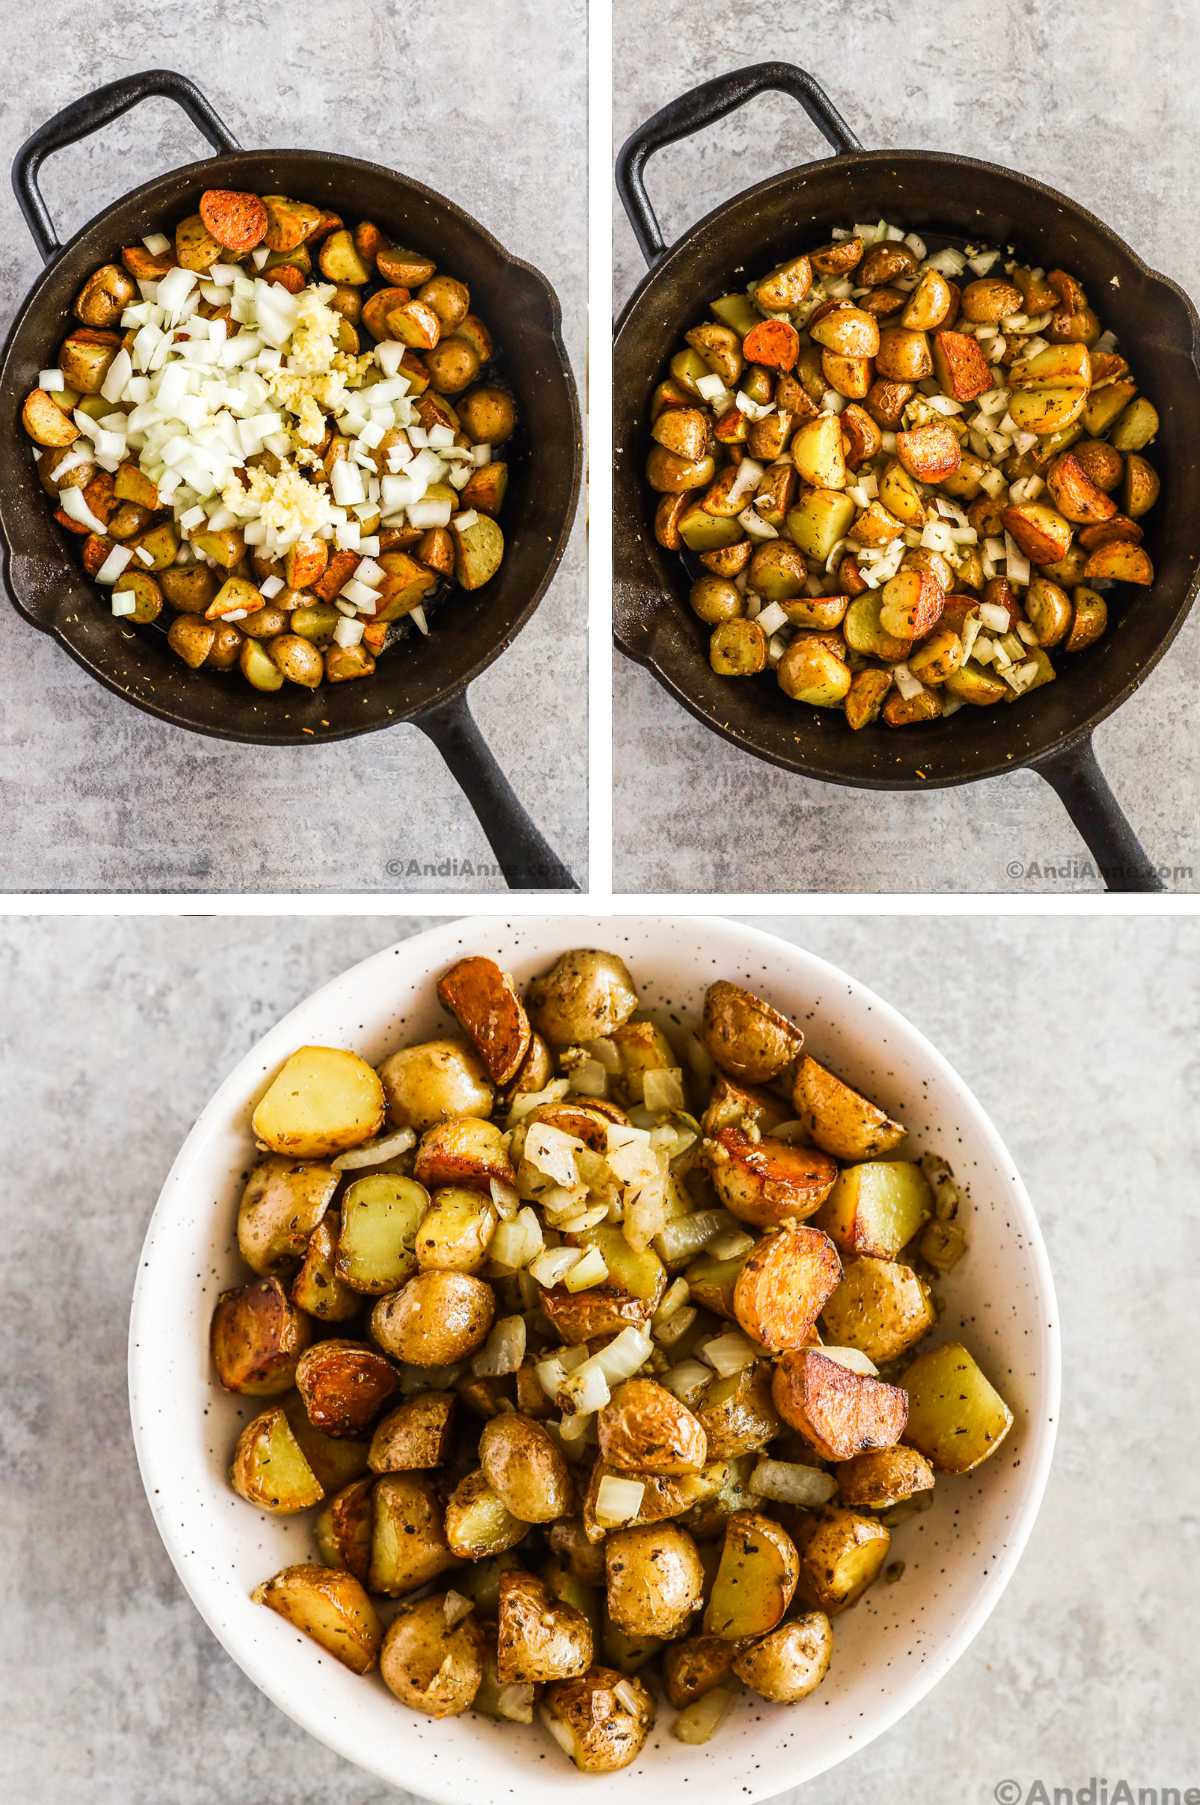 Three overhead images in one: 1. Cooked potatoes in cast iron pan with garlic and onion added on top. 2. Cooked potatoes in cast iron pan with garlic and onion cooked. 3. Potatoes, onion, garlic are added to a white bowl. 